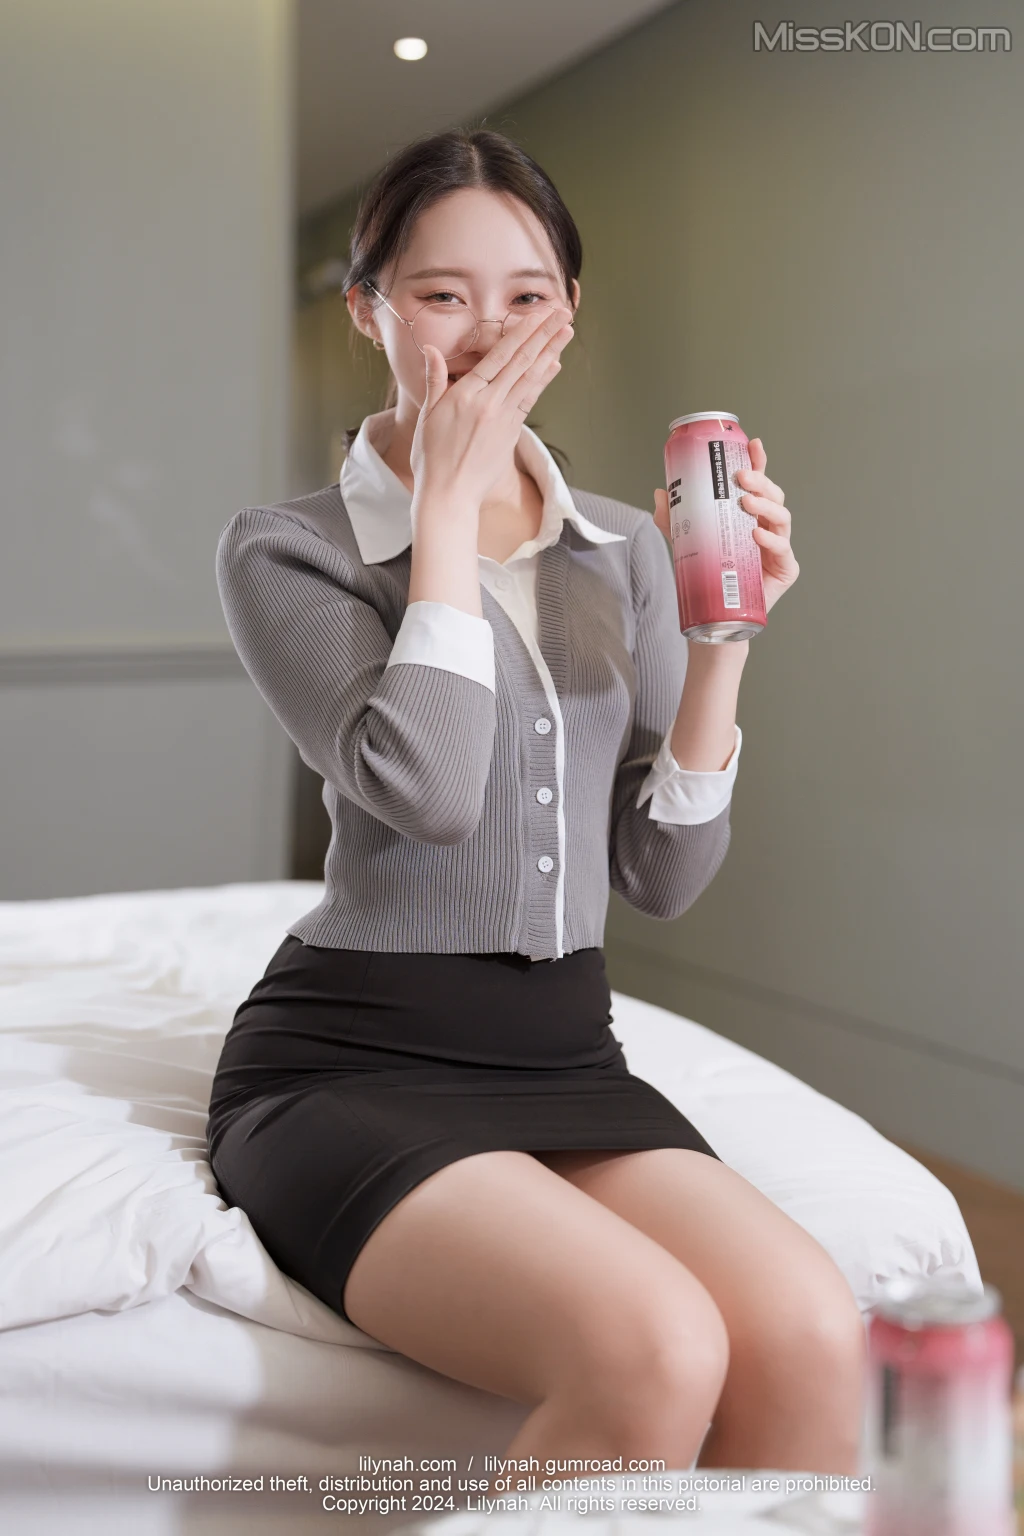 [Lilynah] LW095 Inah (이나): Vol.38 Night on Business Trip (76 图) –插图5